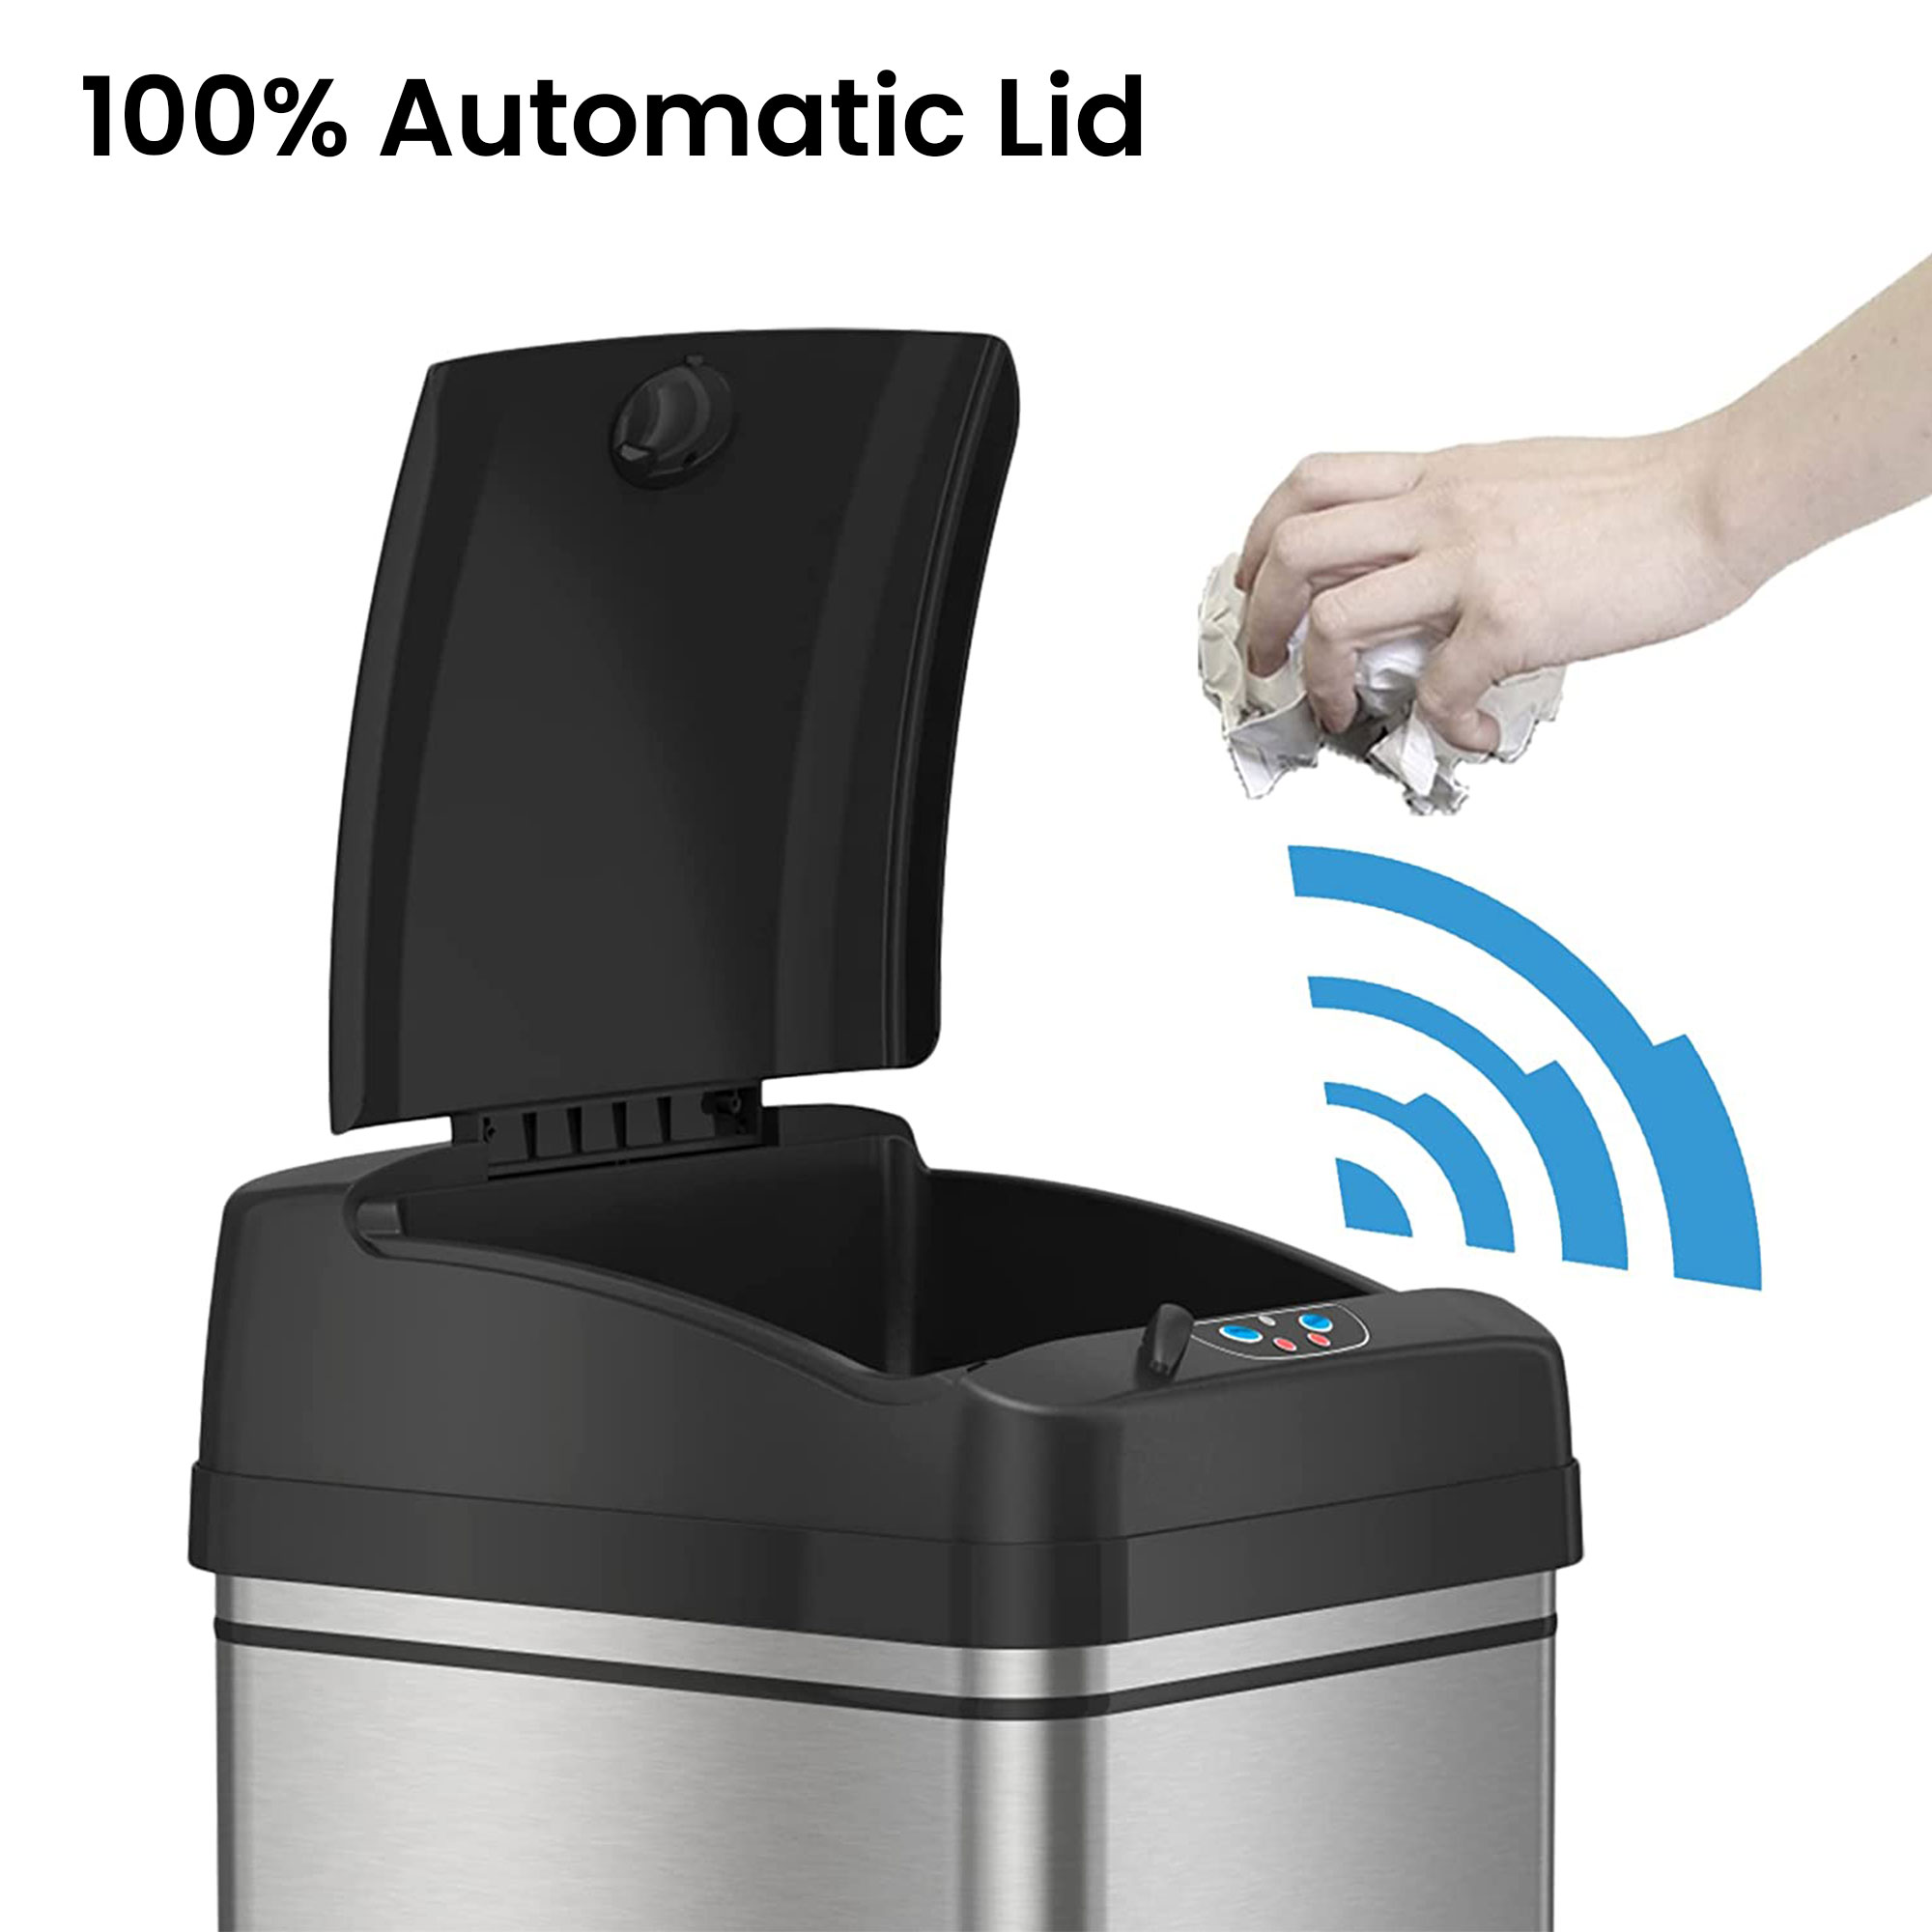 iTouchless 13 gal Odor Absorbing Automatic Stainless Steel Kitchen Garbage Can - image 2 of 6